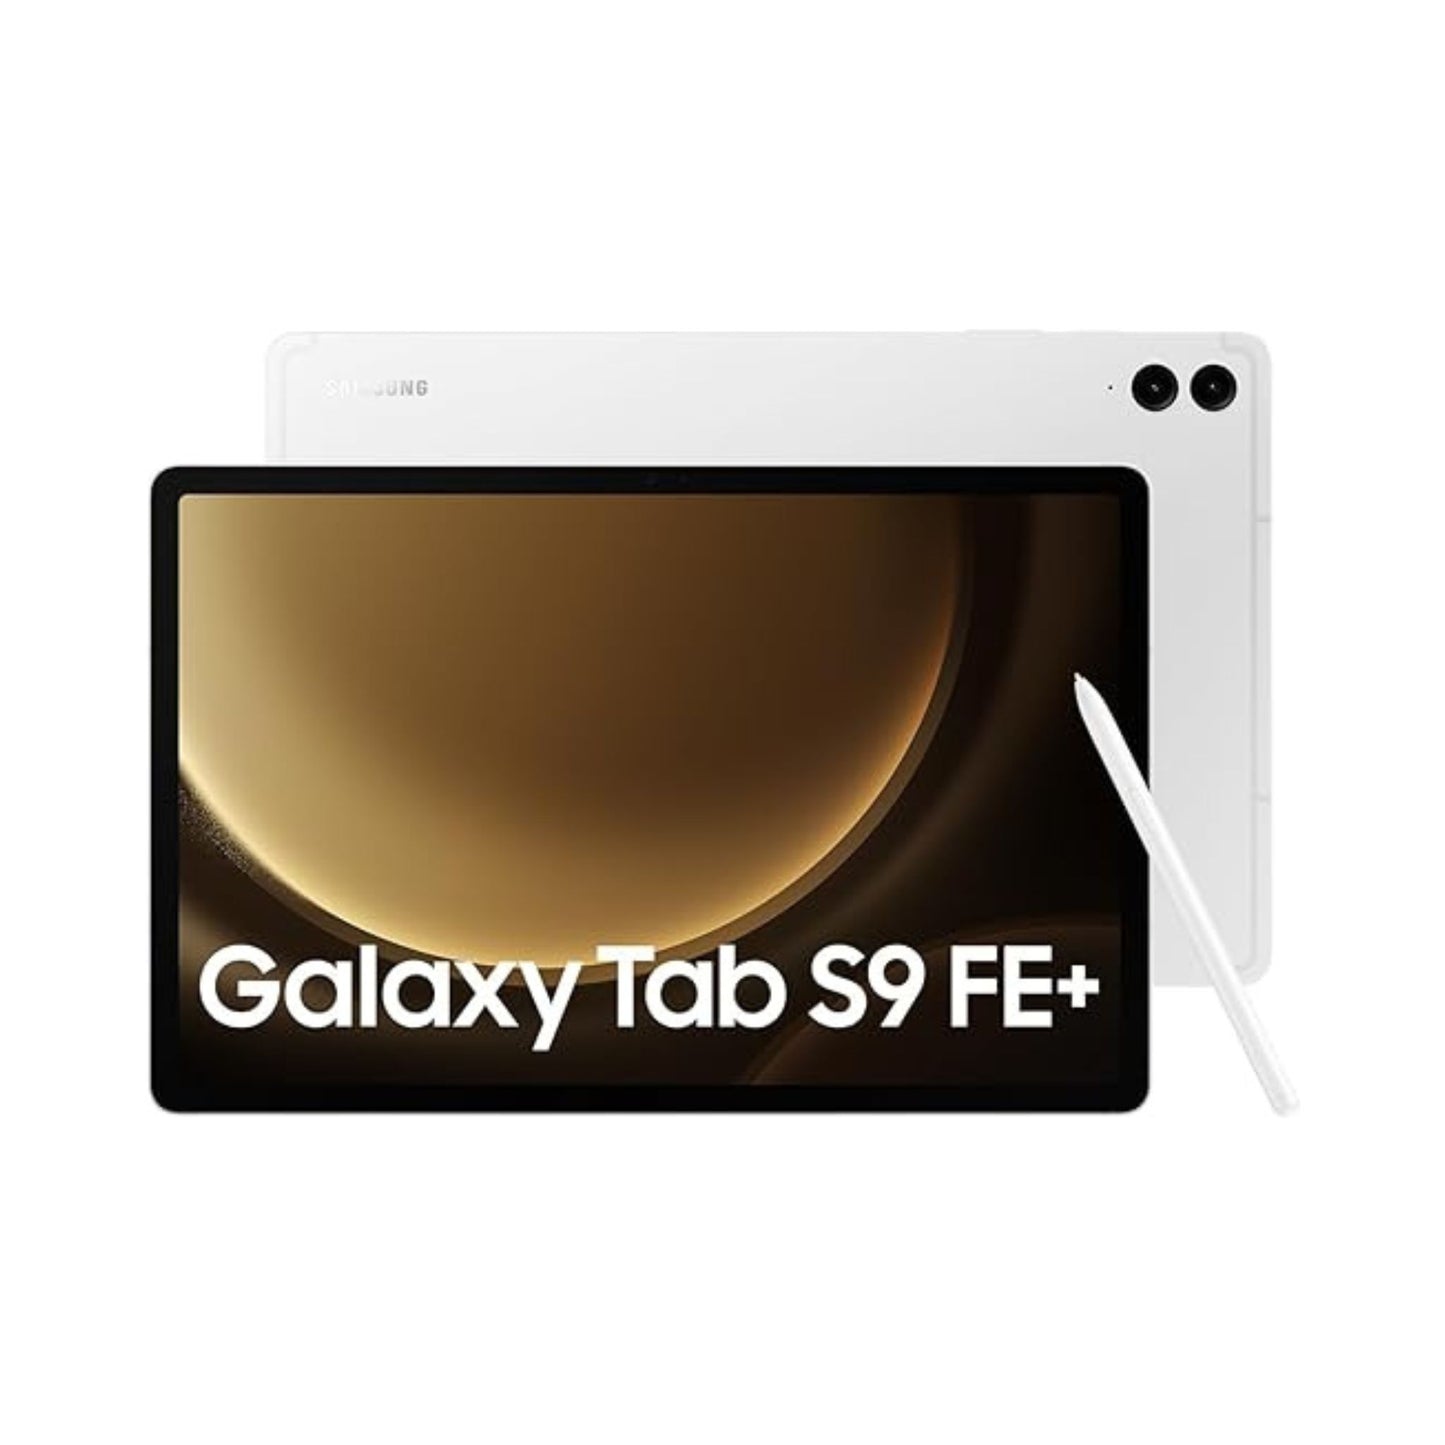 Samsung Galaxy Tab S9 FE+_WiFi Android Tablet_S Pen Included_Silver(UAE Version)